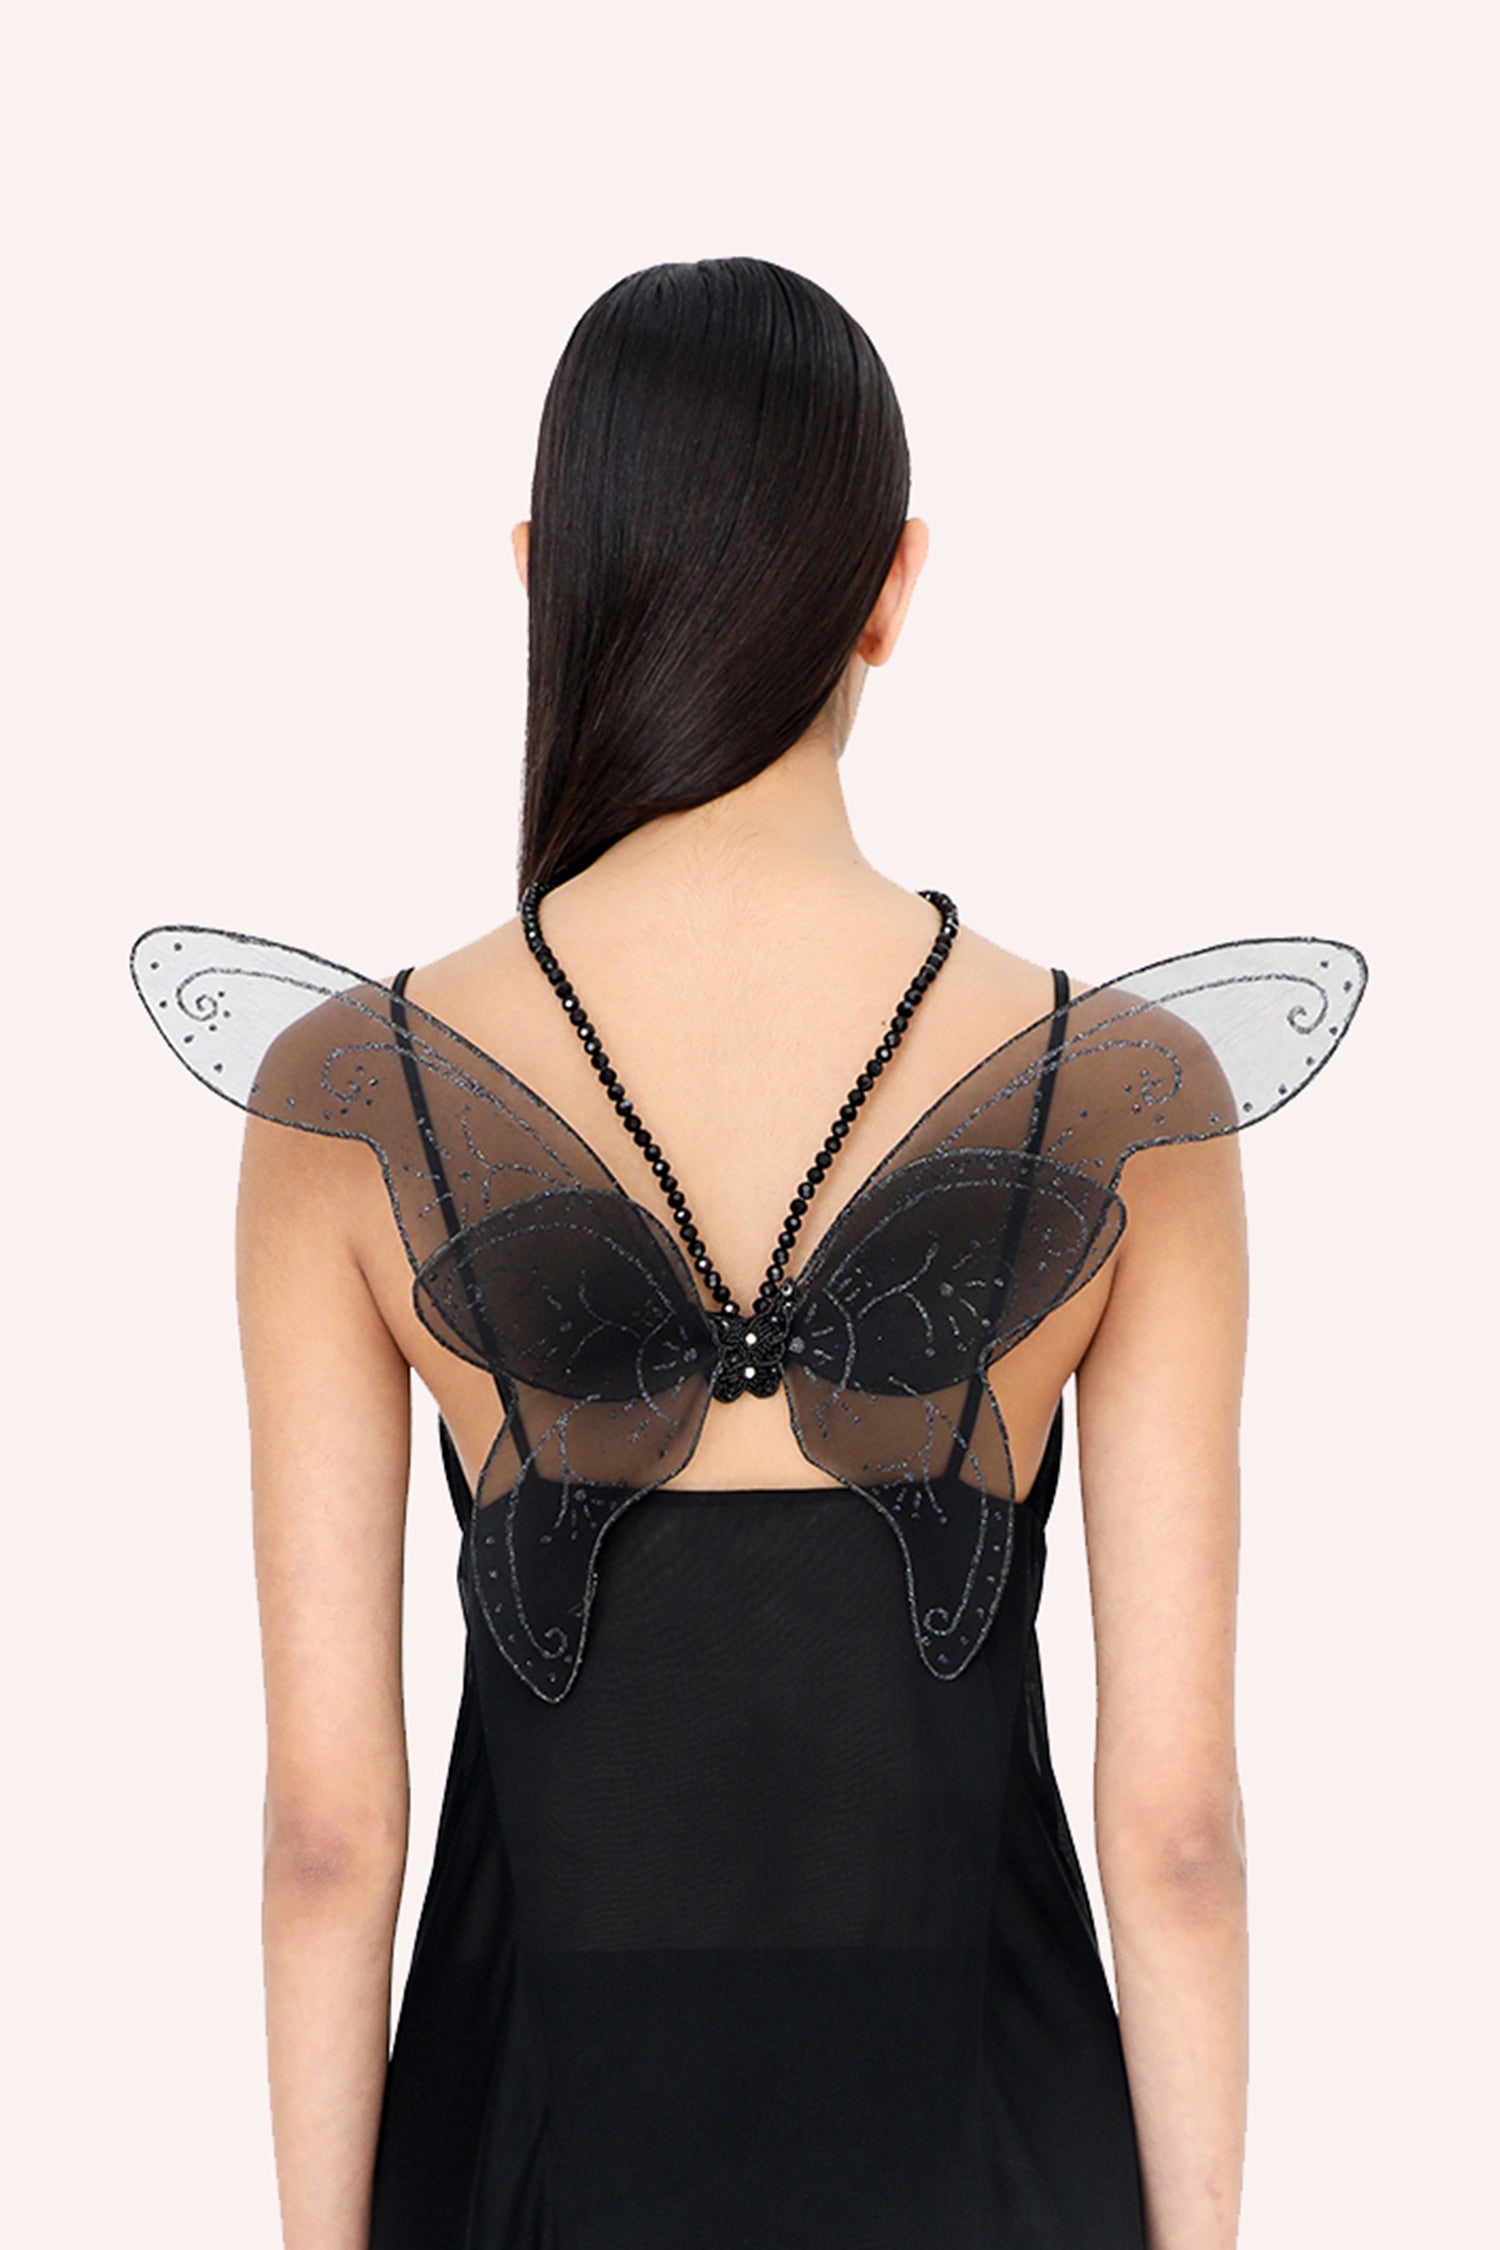 transparent black beads strap around neckline is fixed at the center butterfly body to wear the wings on the back 